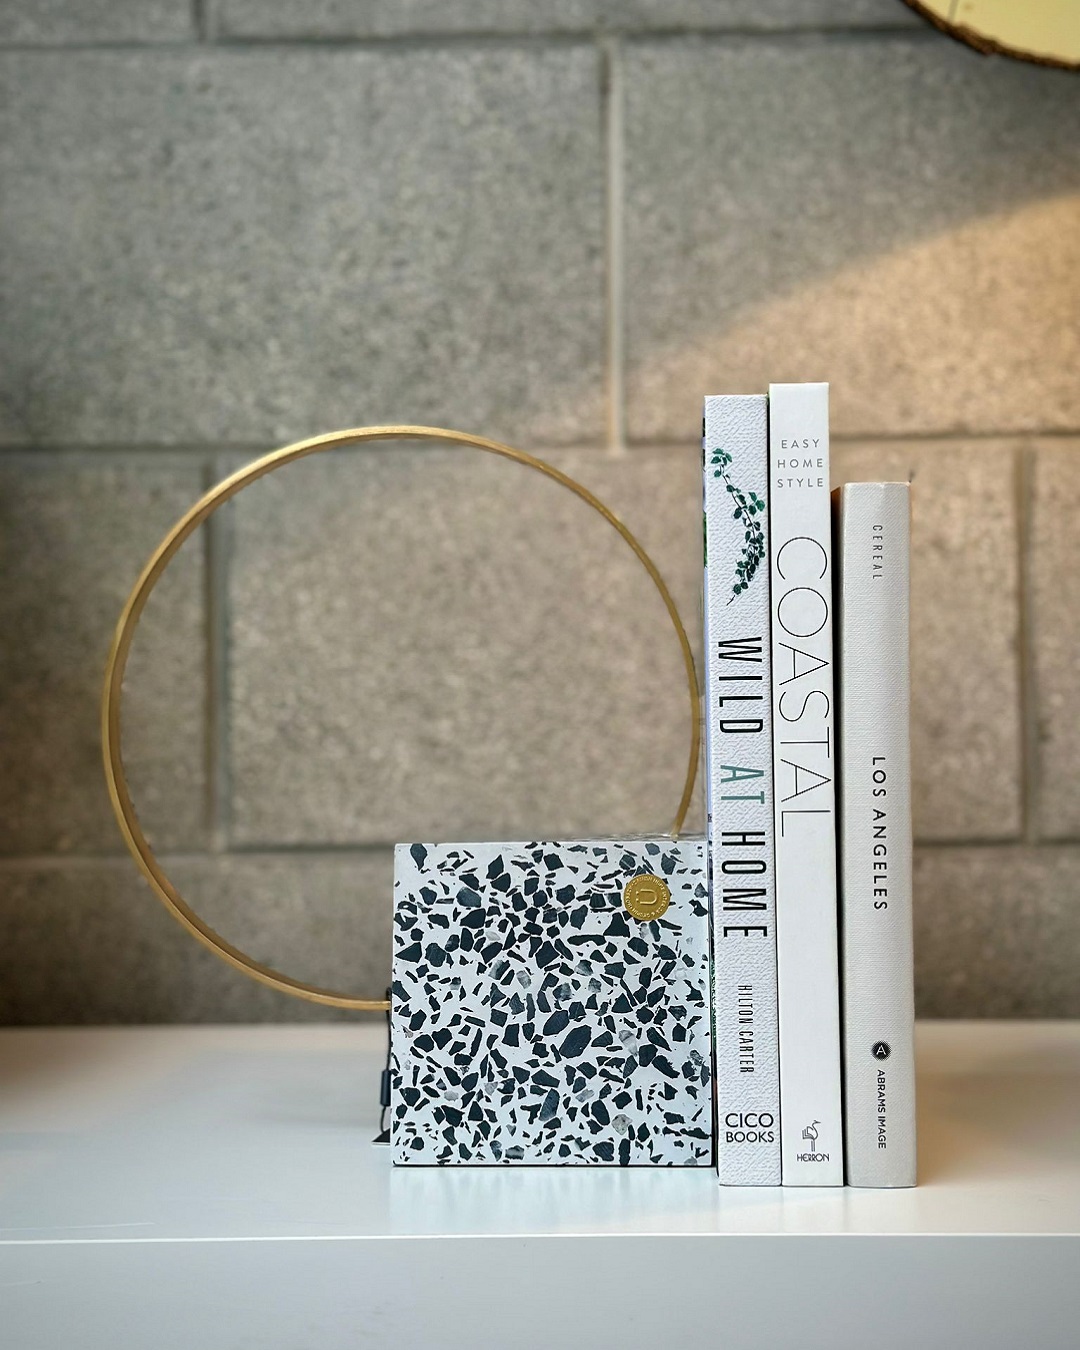 Speckled square bookend with brass loop on shelf with books